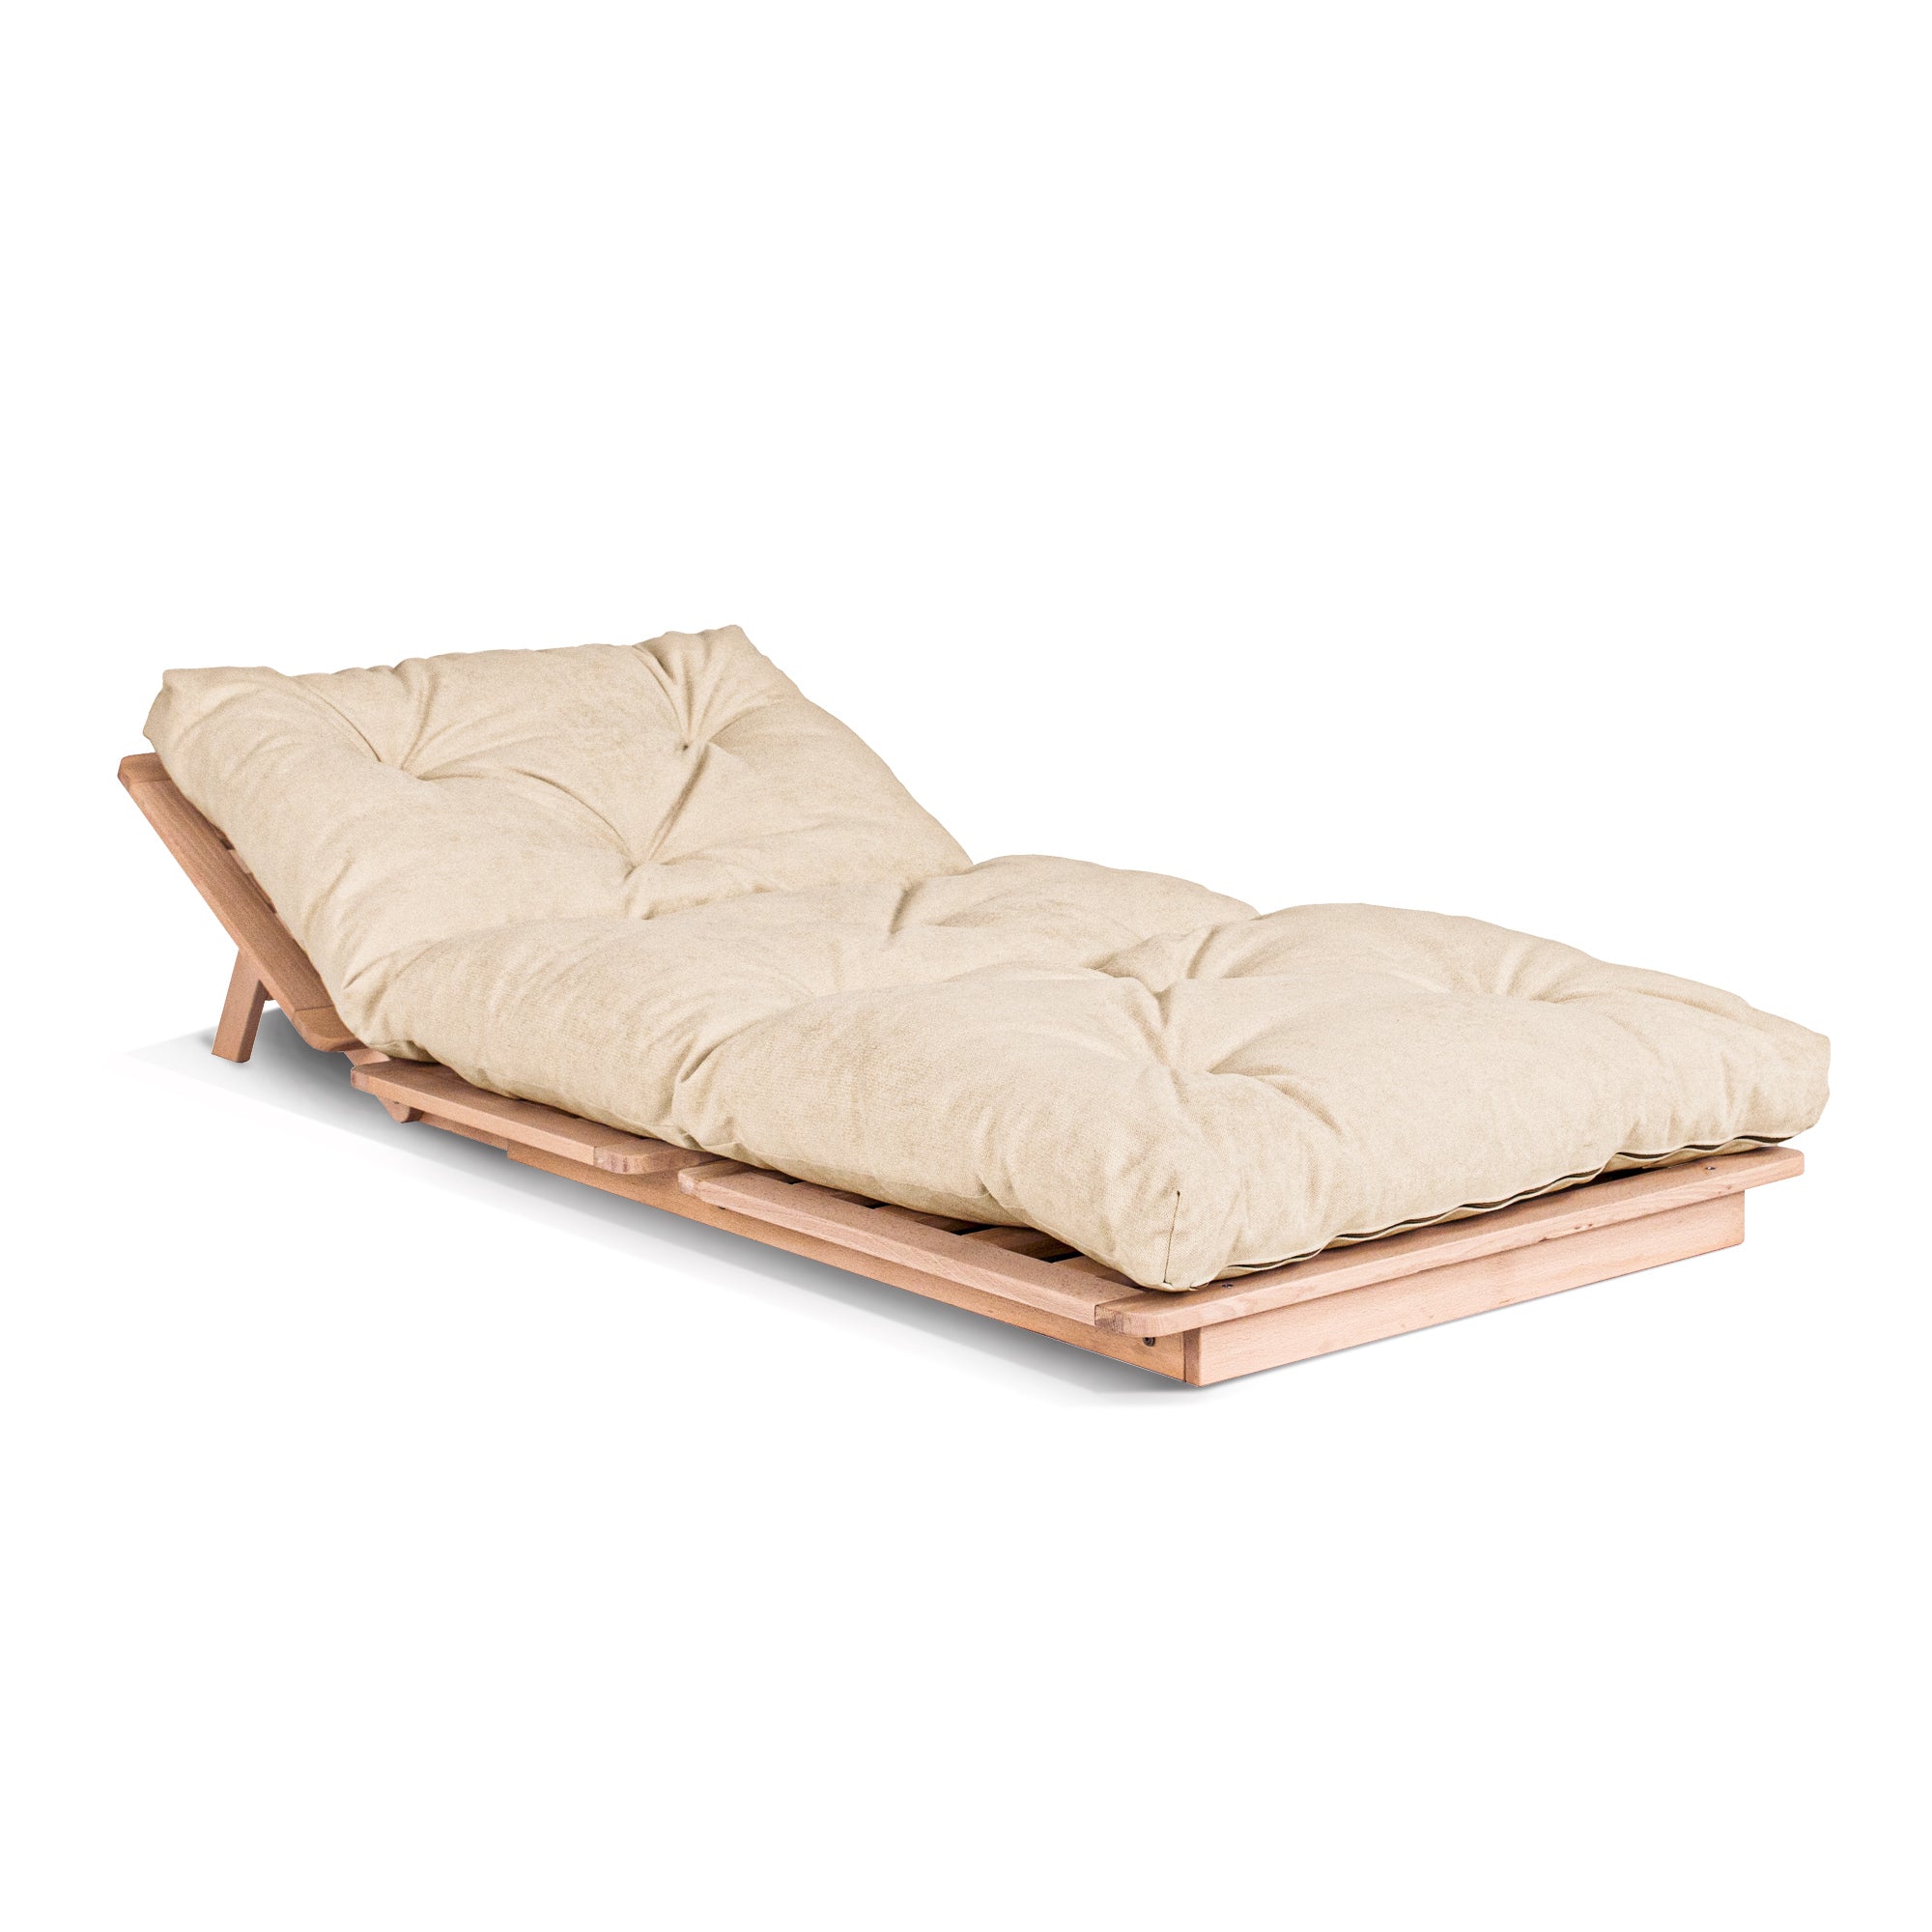 LAYTI-90 Single Futon Bed Chair, Solid Beech Wood, Natural